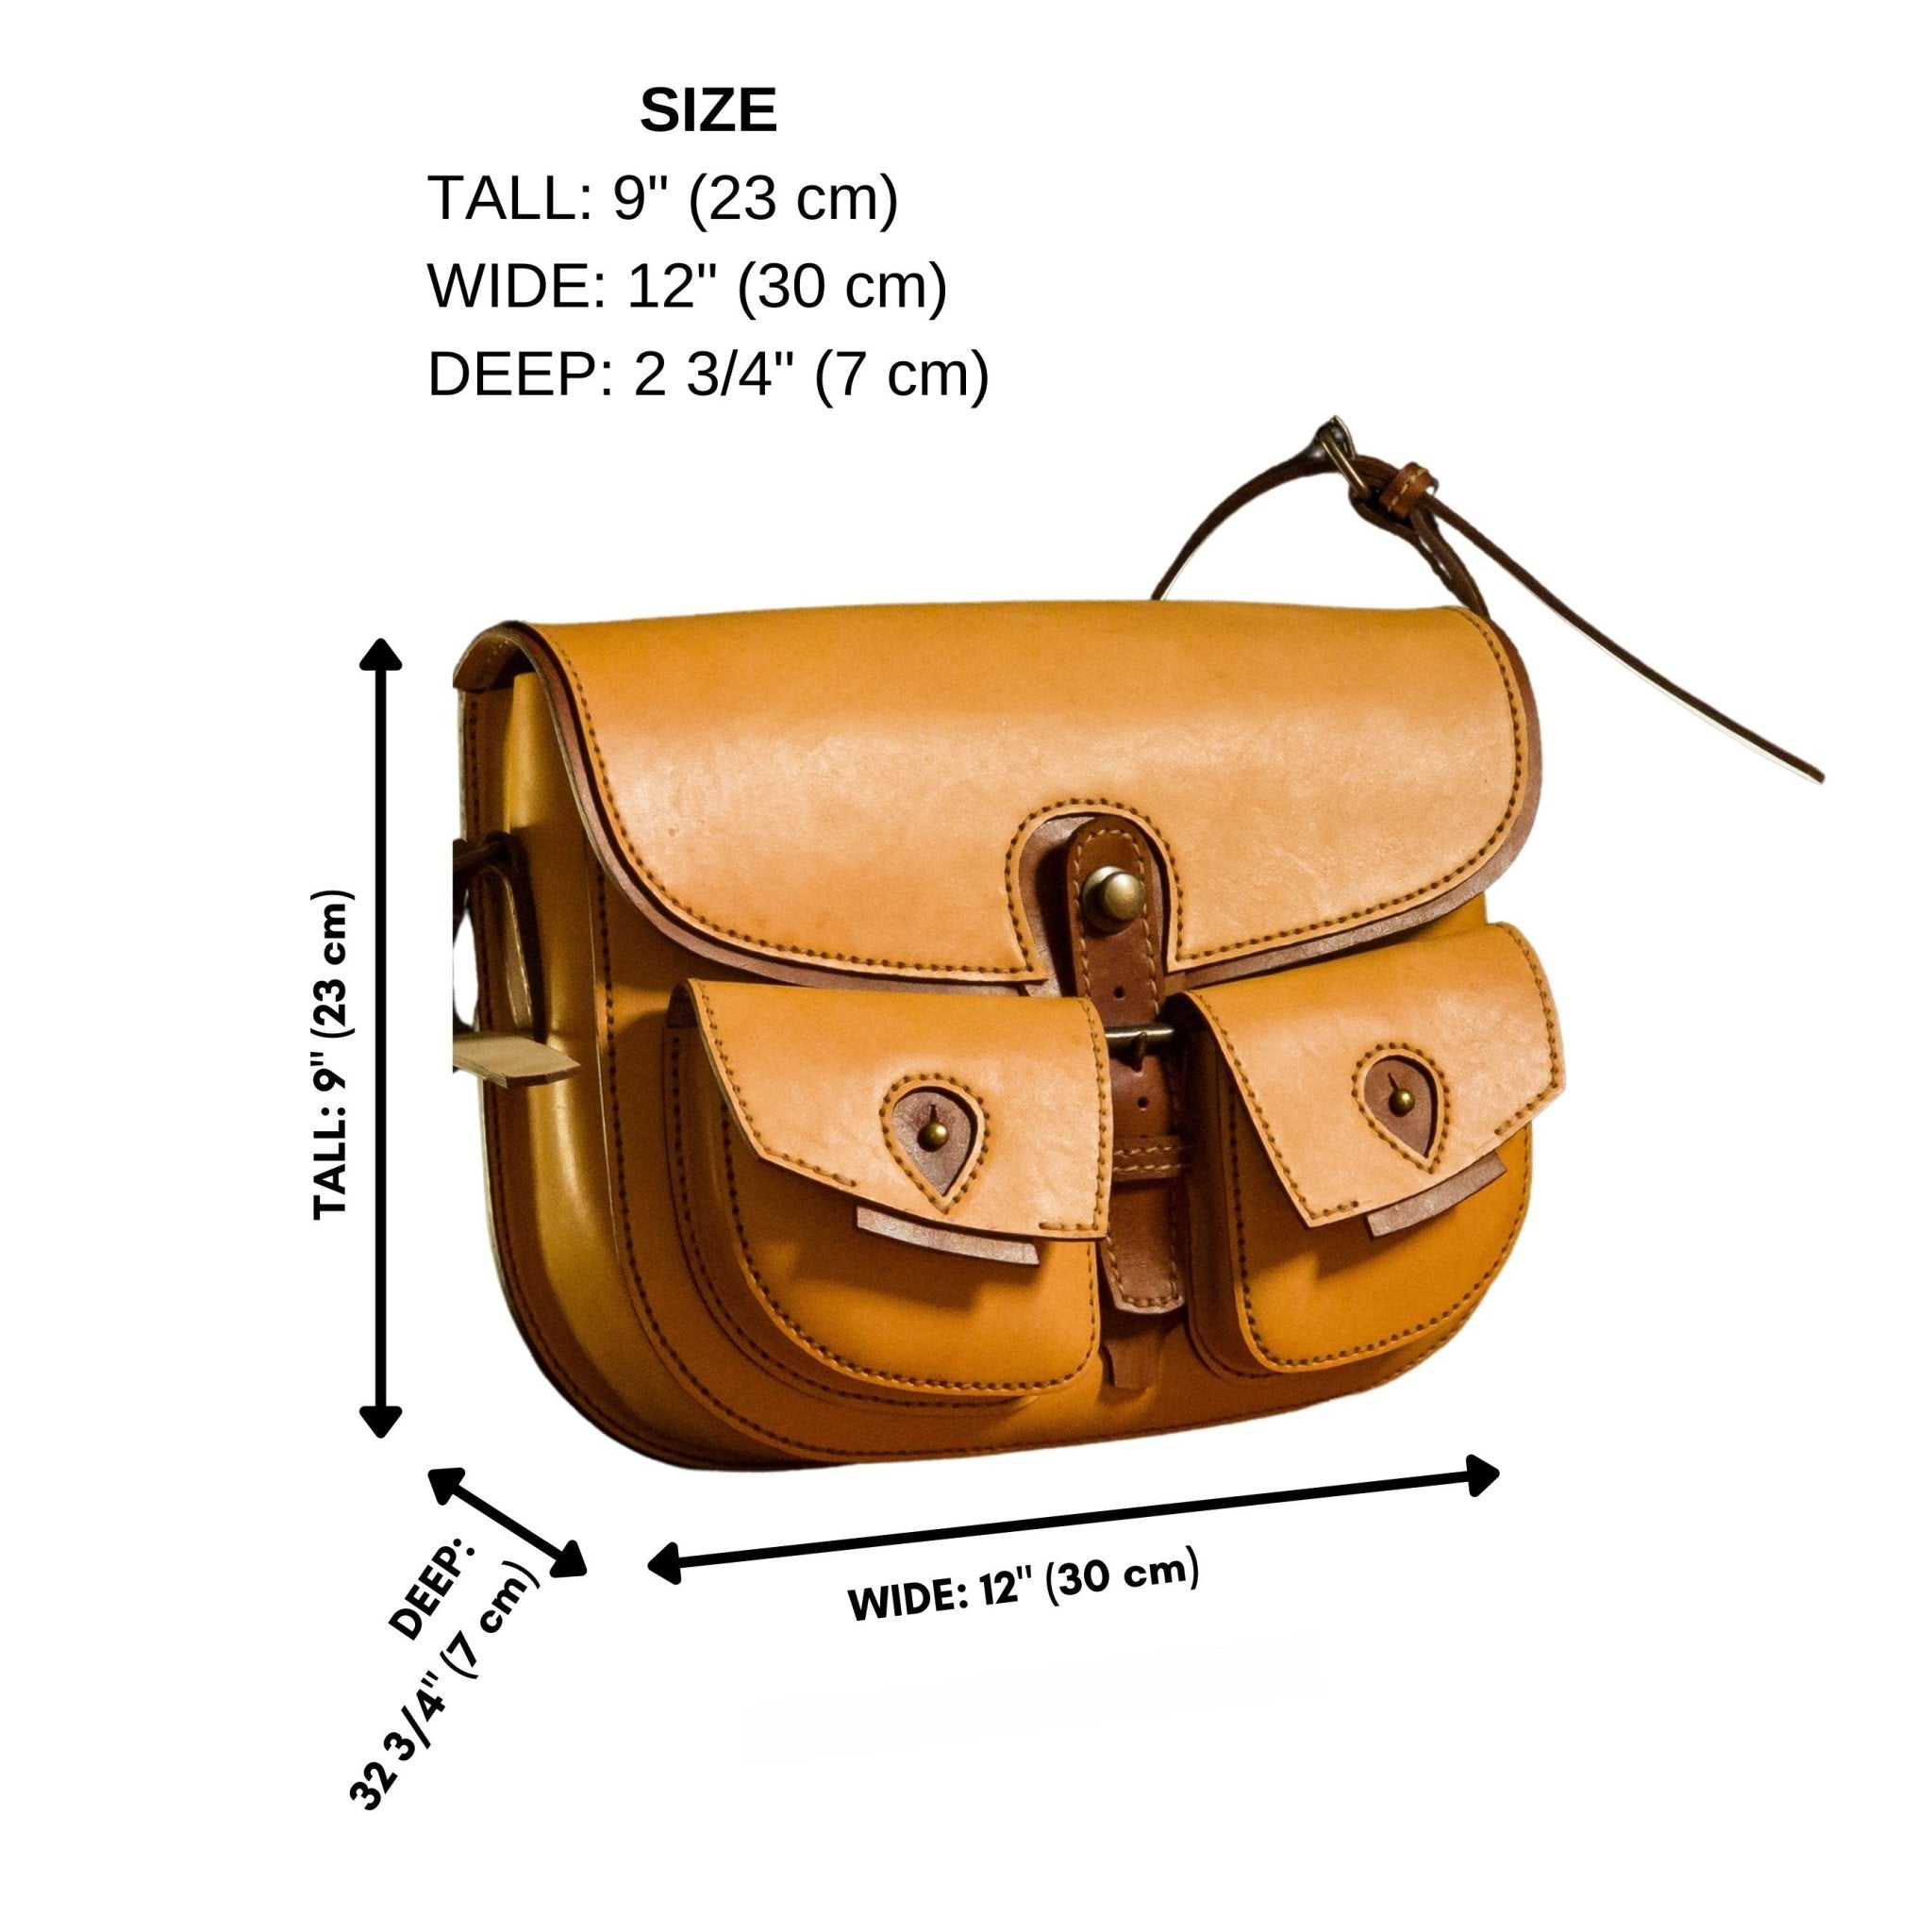 Miriam Messenger Bag, PDF Pattern and Instructional Video by Vasile and Pavel - Vasile and Pavel Leather Patterns